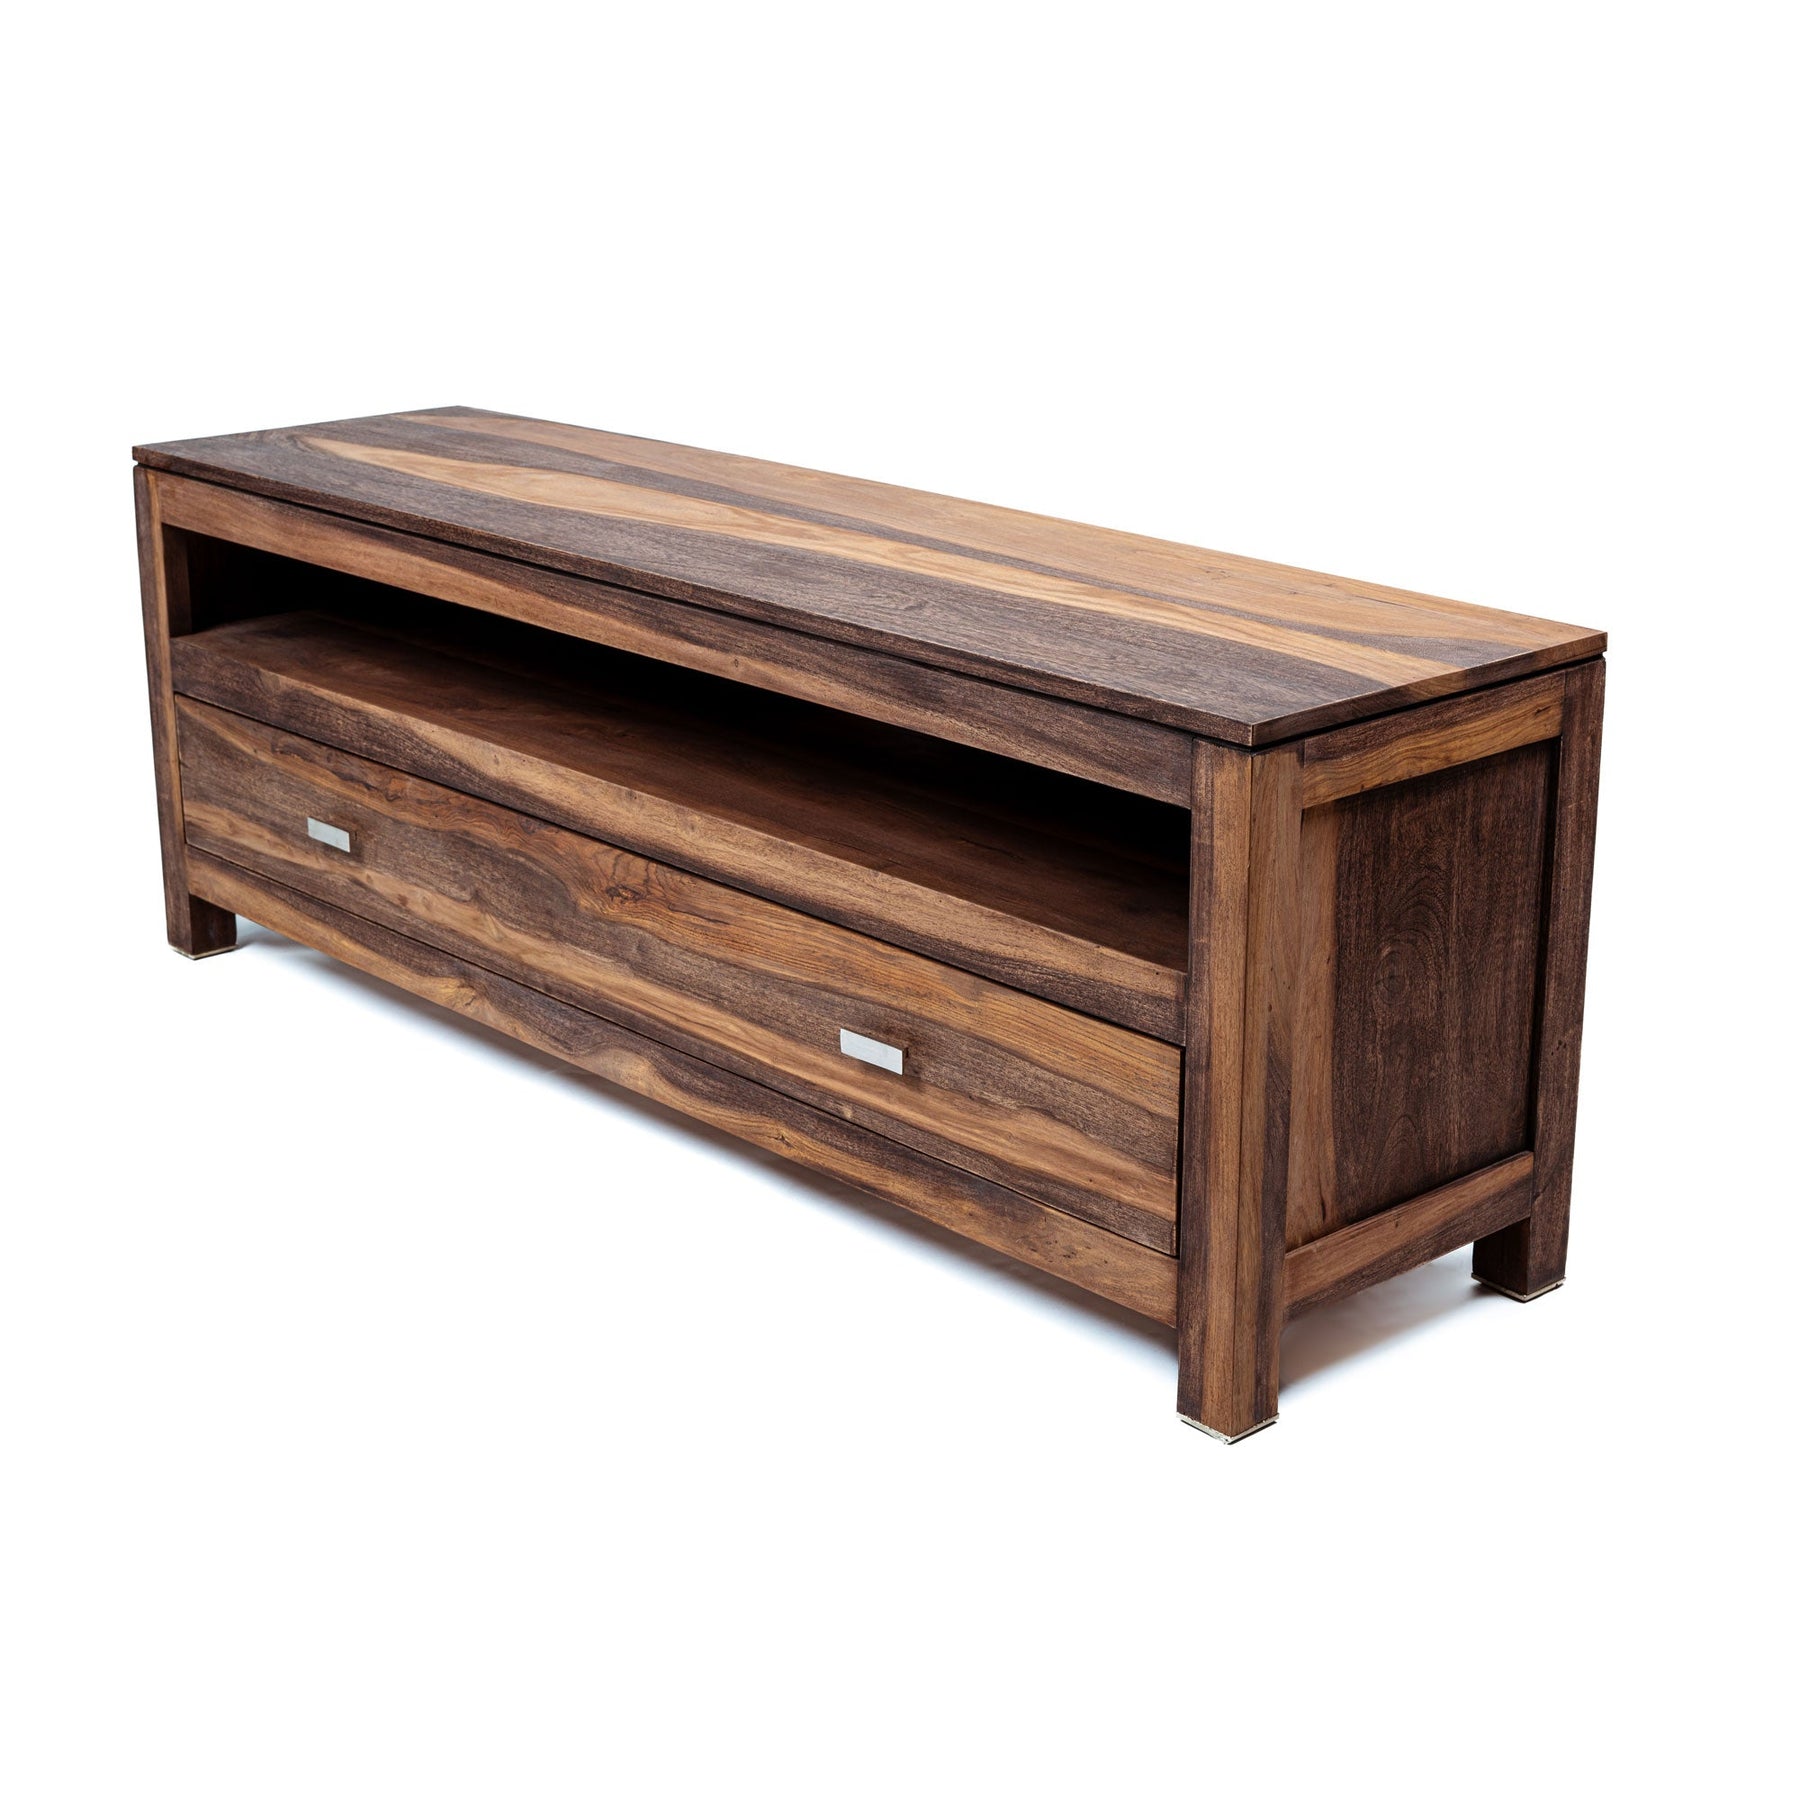 Zen TV Cabinet | Wooden TV Stand with Shelf and Drawer | Entertainment Center and storage | 140x40x50 cm